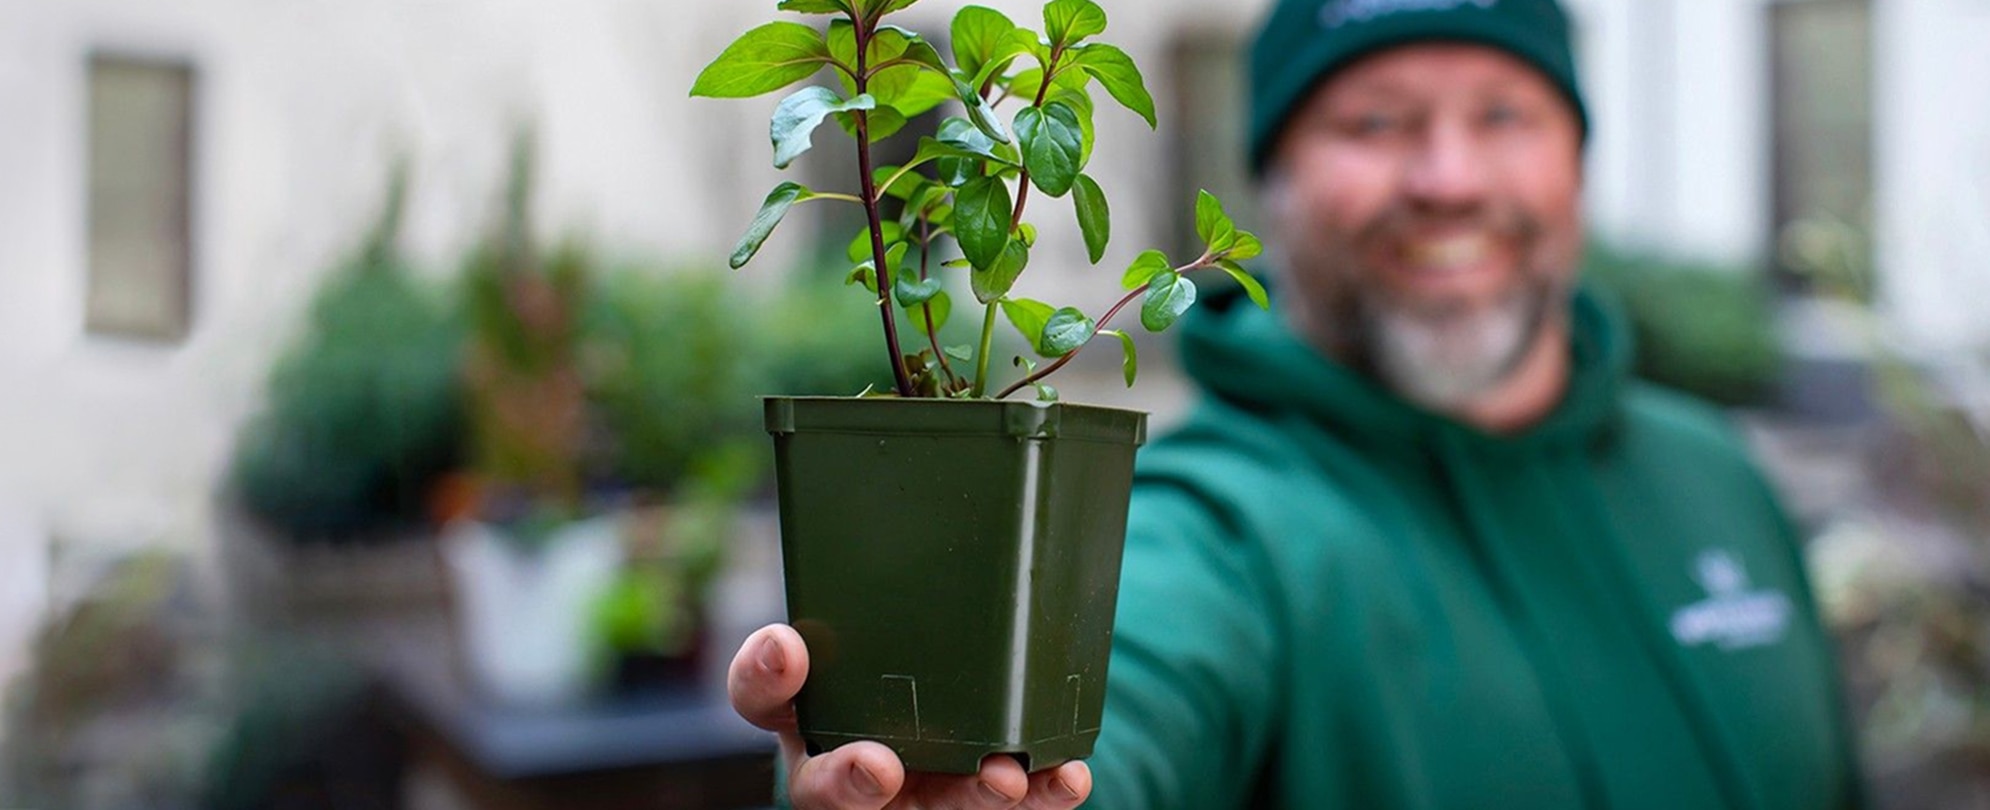 A man in a green hoodie and green hat holds up a small plant in a green plastic container close to the camera so the plant is in focus but he is out of focus.